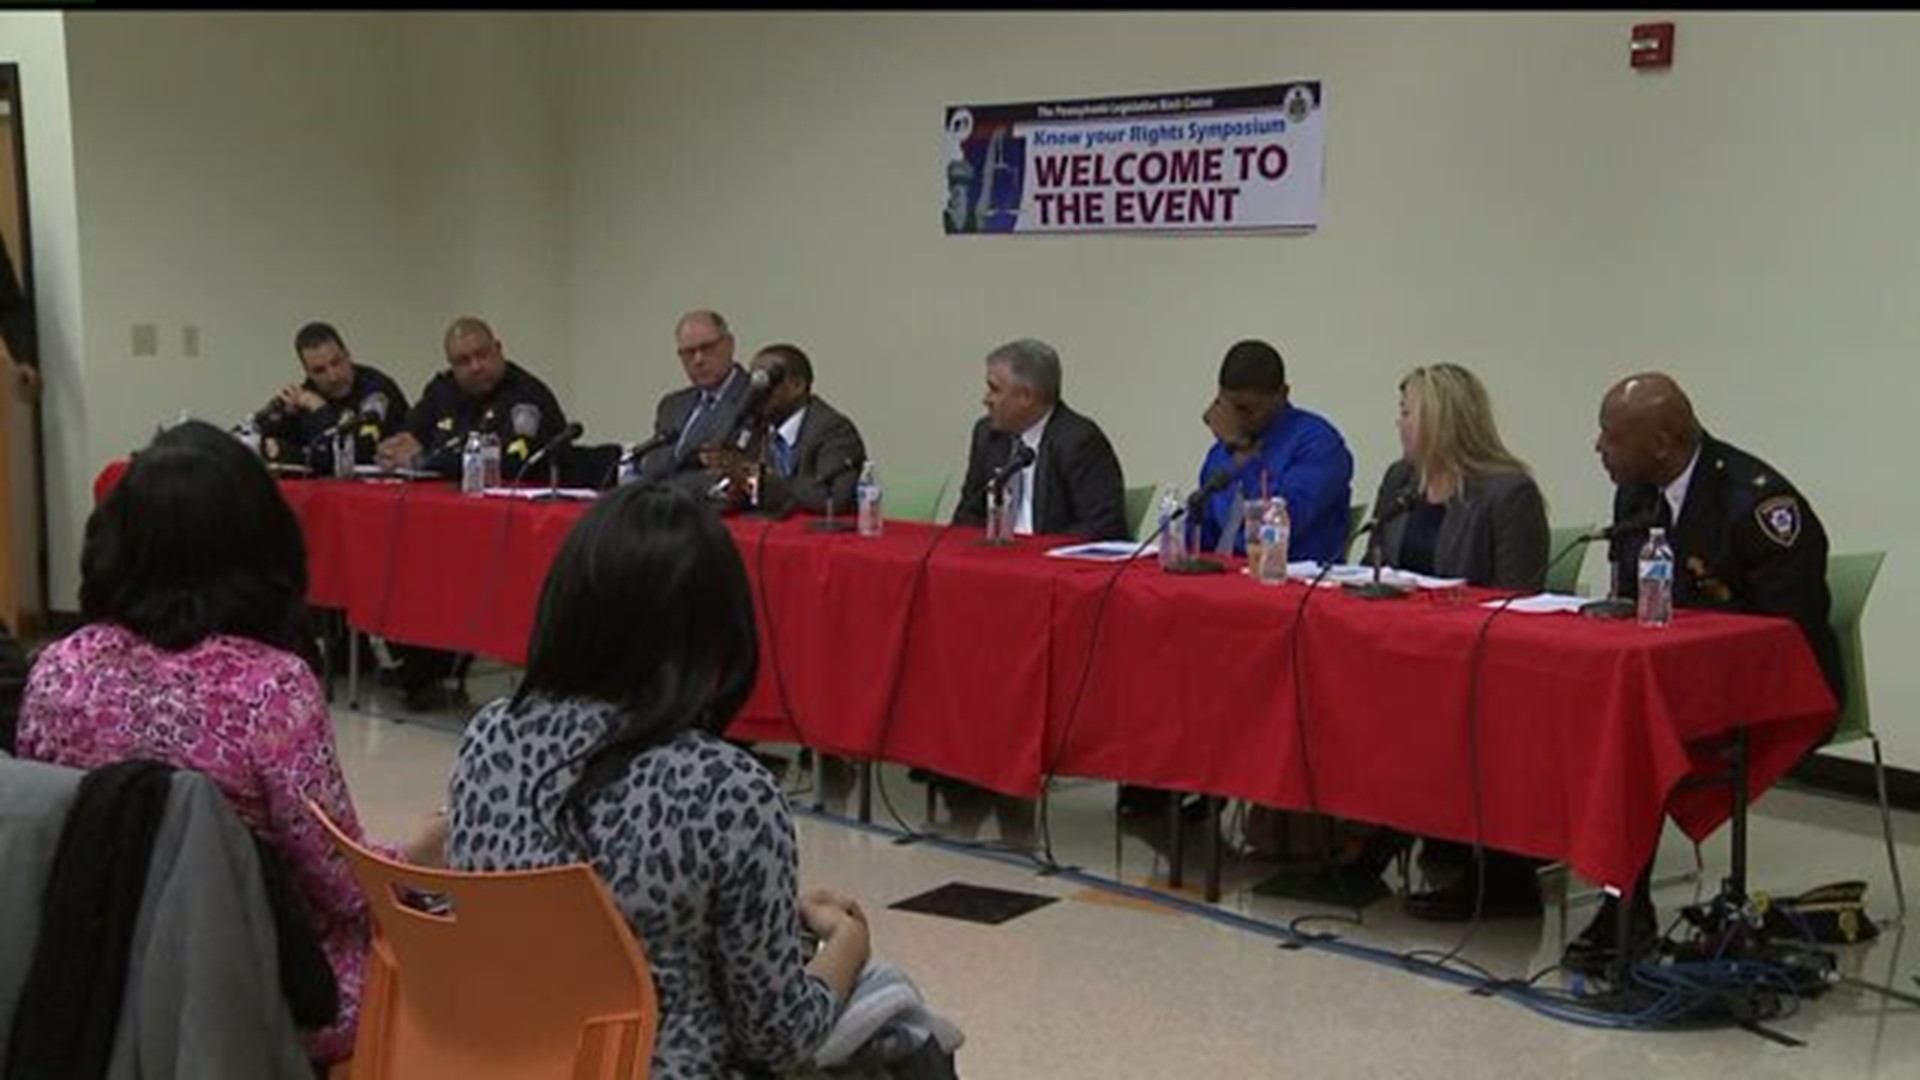 "Know Your Rights" Symposium in Harrisburg